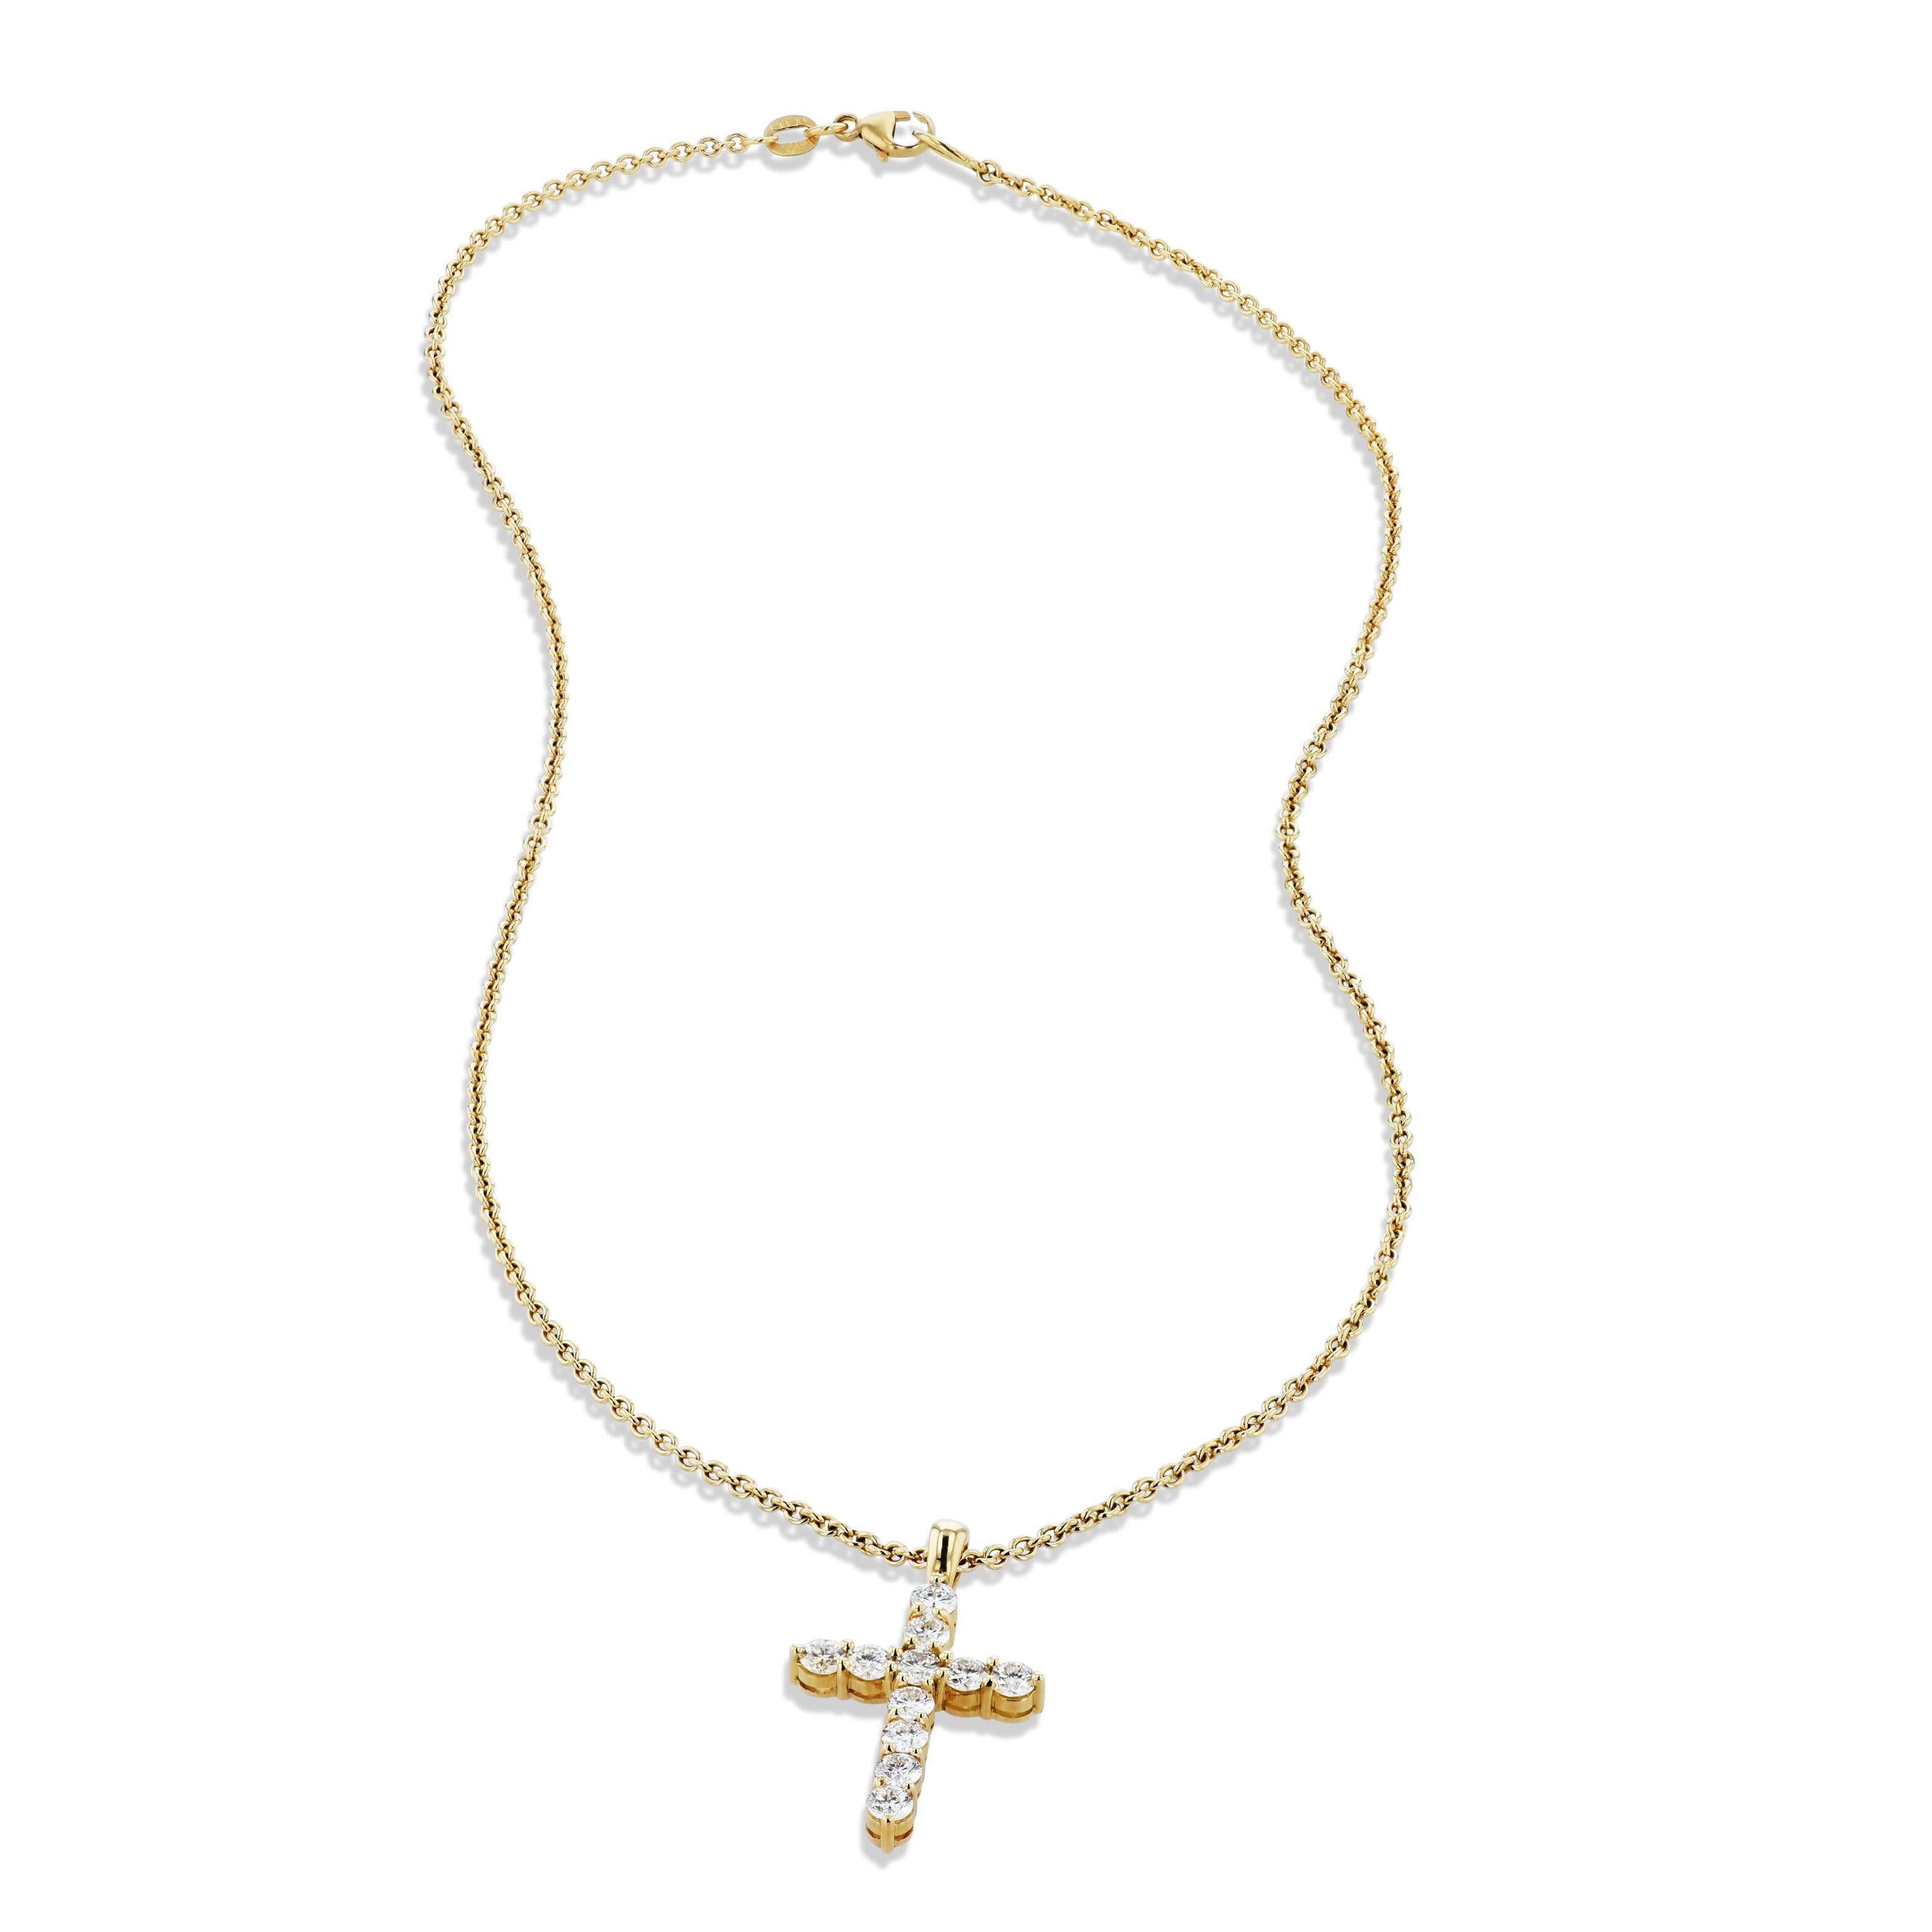 Handmade 1.68 Carat Diamond Cross Pendant Yellow Gold Necklace In New Condition For Sale In Miami, FL